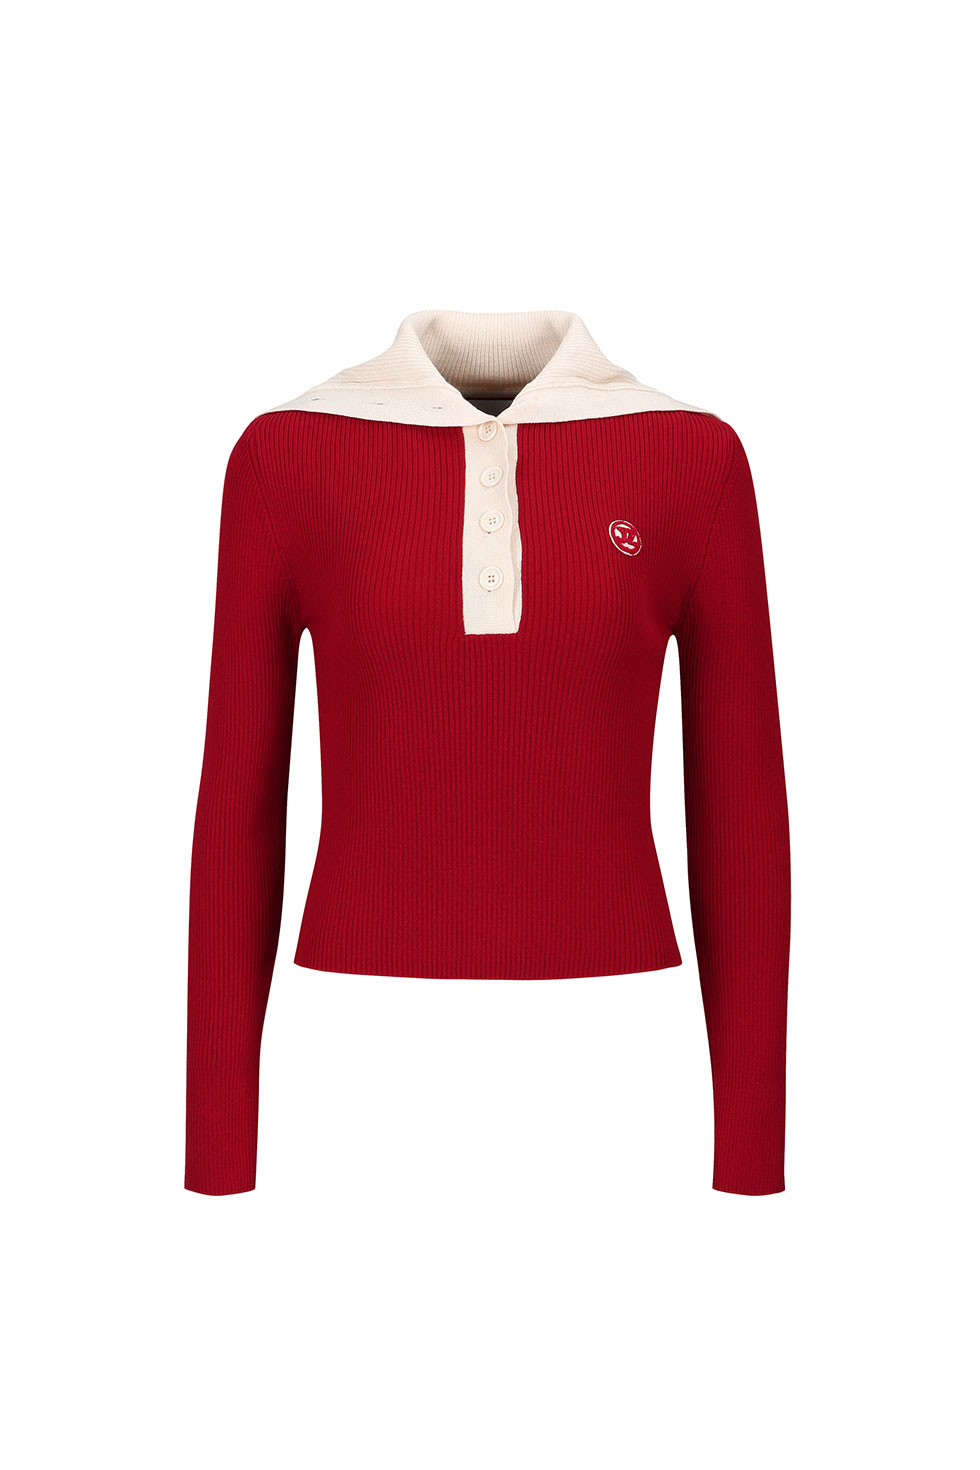 CONTRASTED NECK COLLAR KNIT TOP -RED